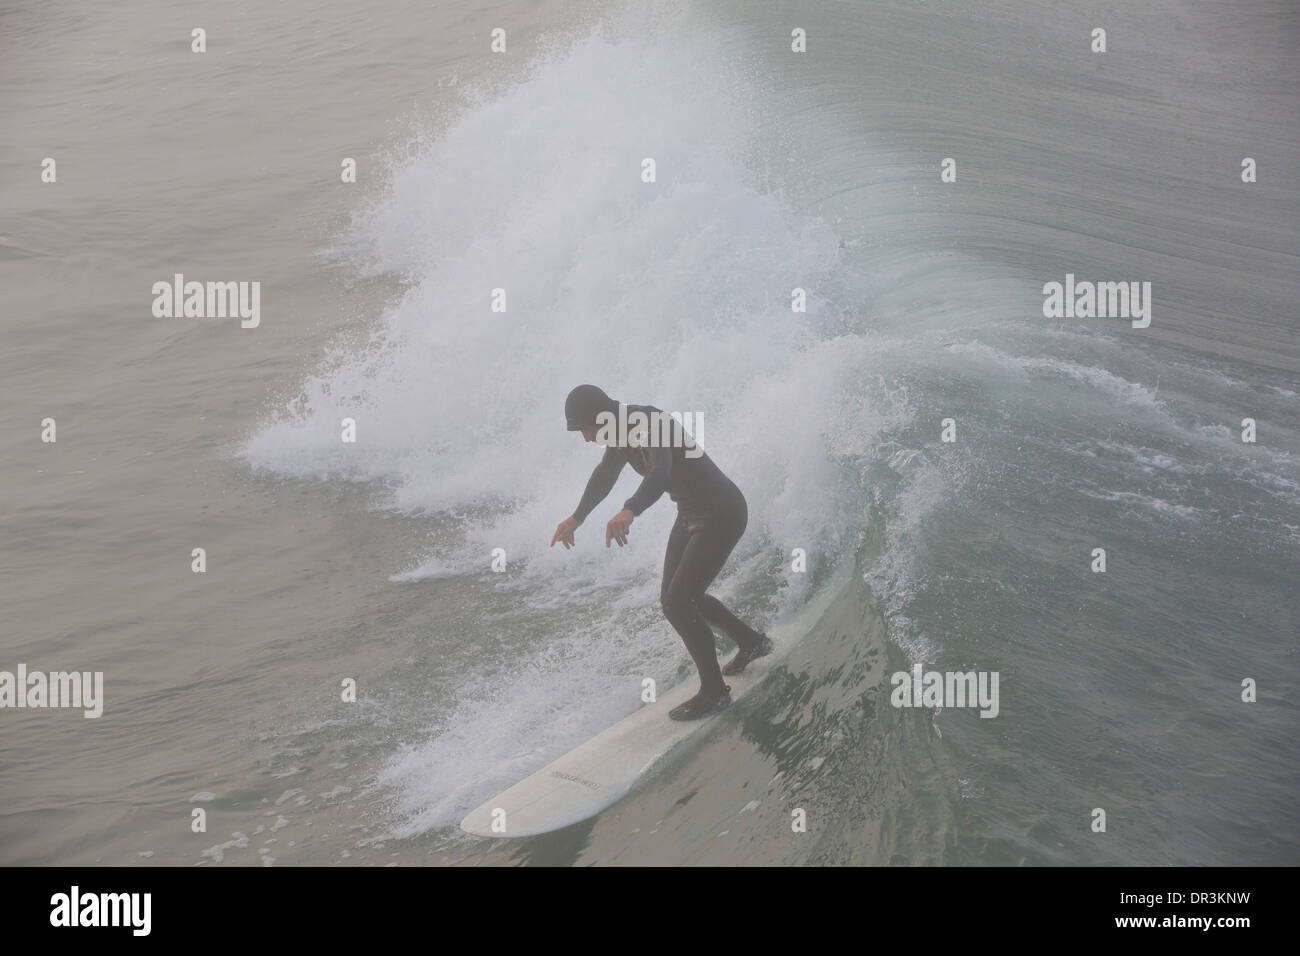 Surfing in the Mist At Hermosa Beach, Los Angeles, California. Stock Photo